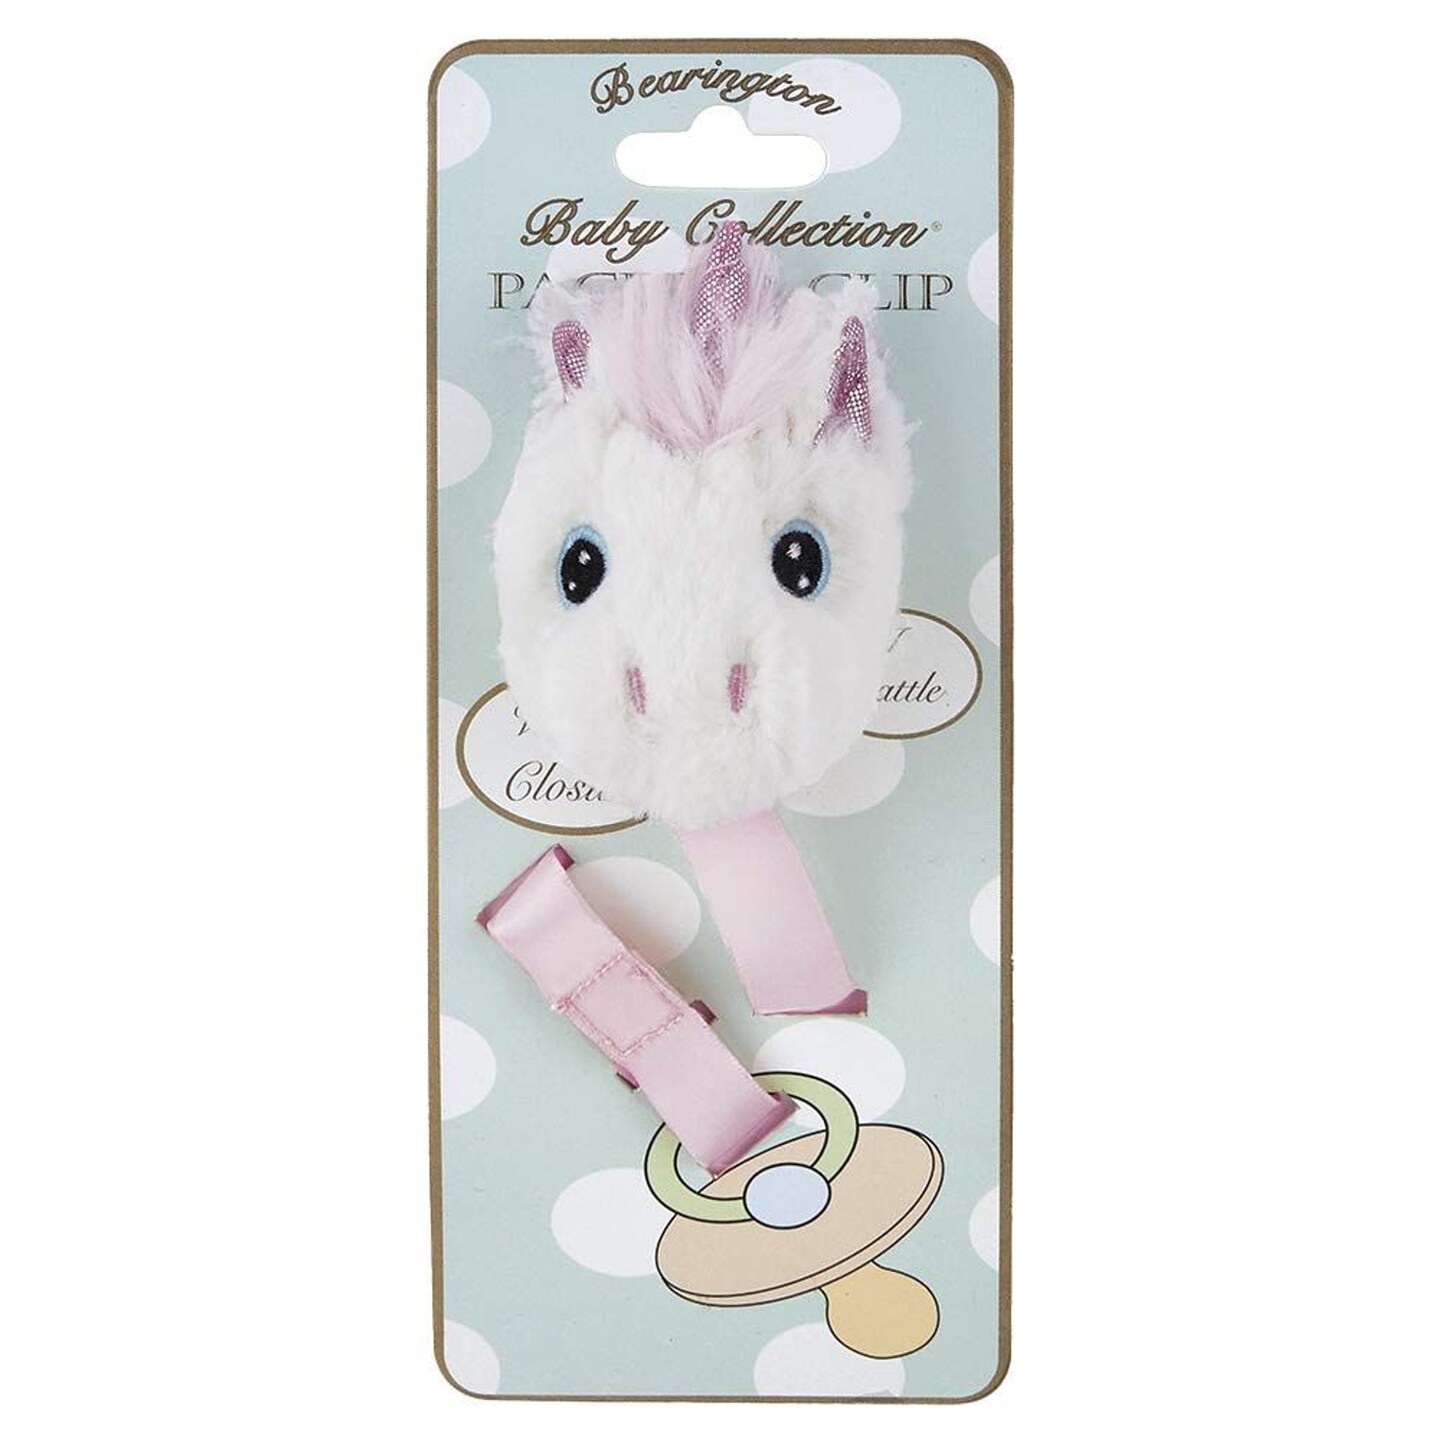 Bearington Baby Dreamer Plush Unicorn Pacifier Holder with Pink Satin Leash and Clip